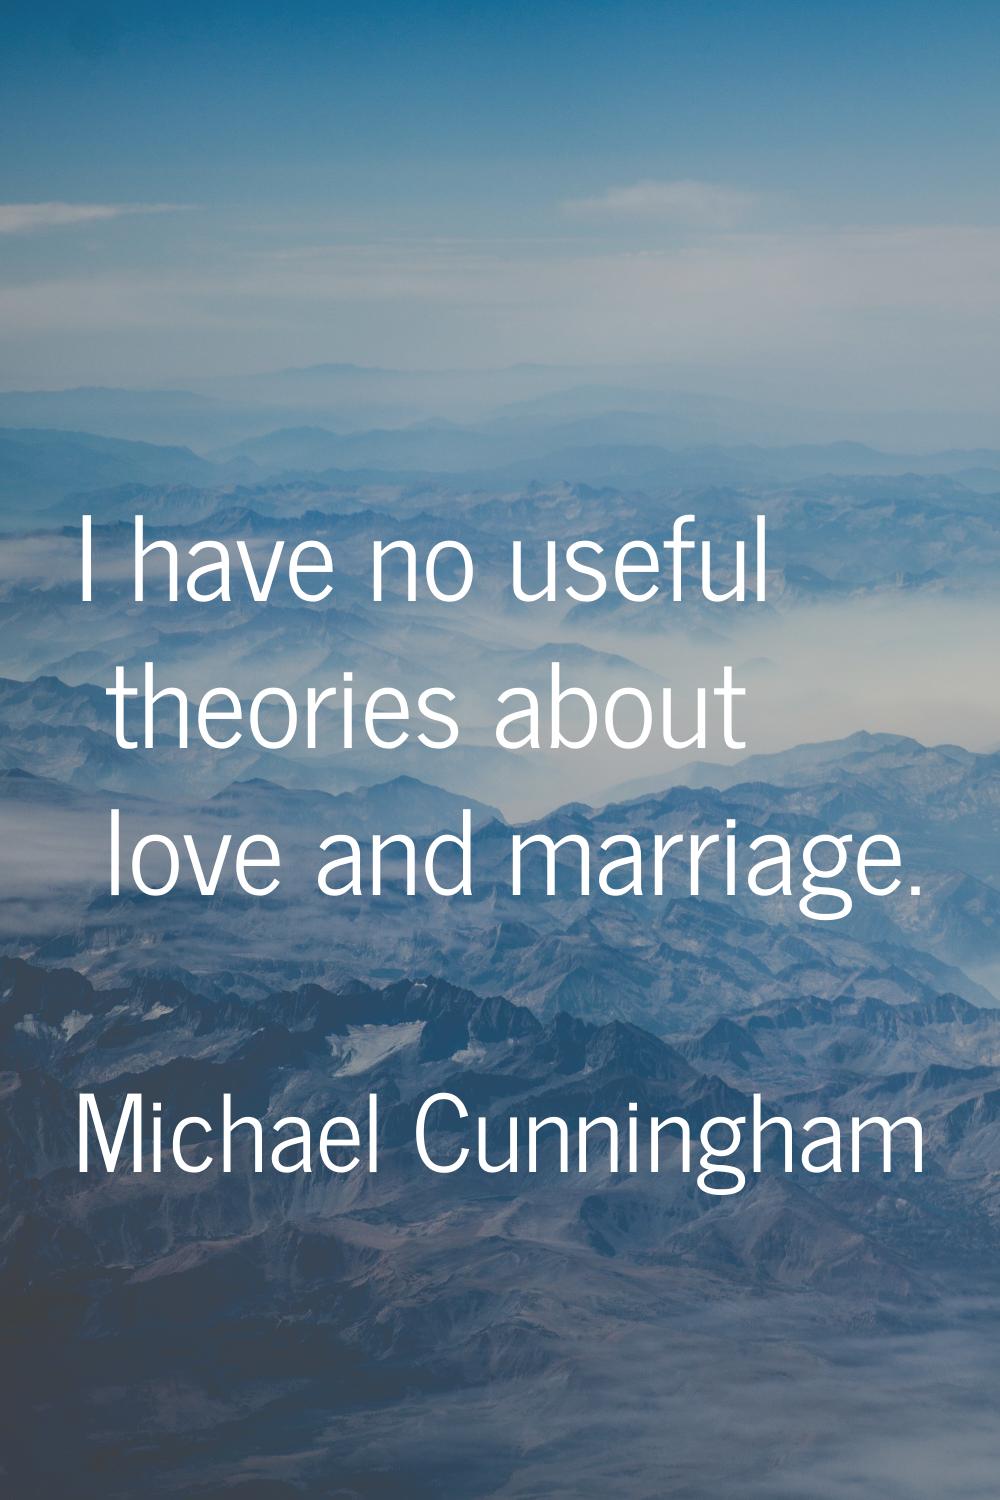 I have no useful theories about love and marriage.